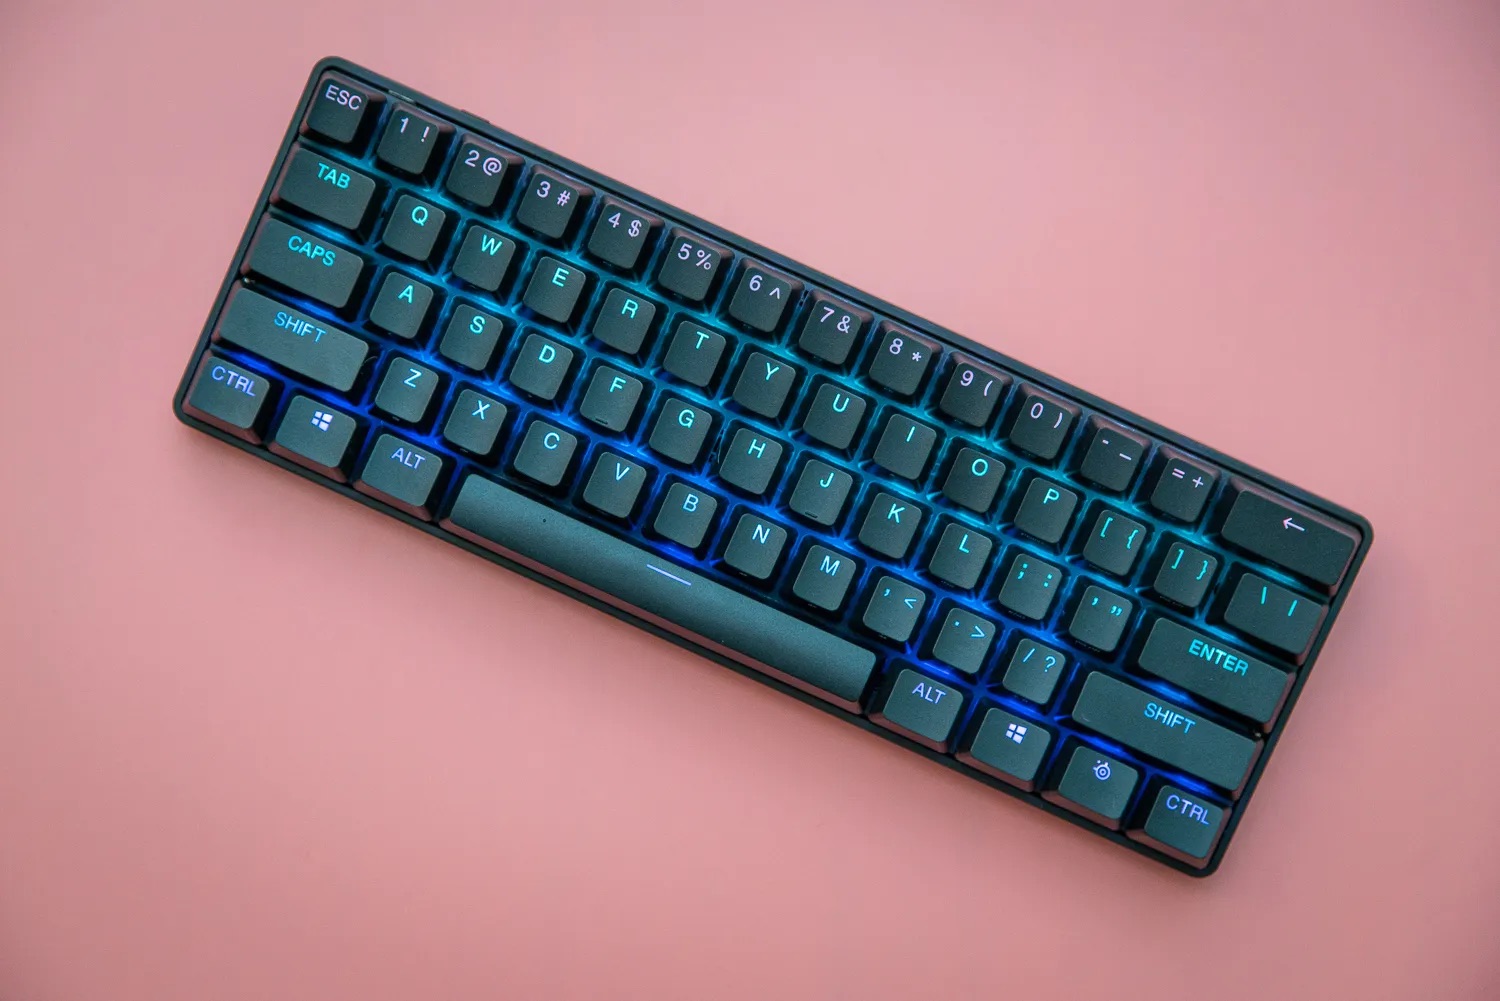 How To Change The Timing In Keystrokes On A Gaming Keyboard